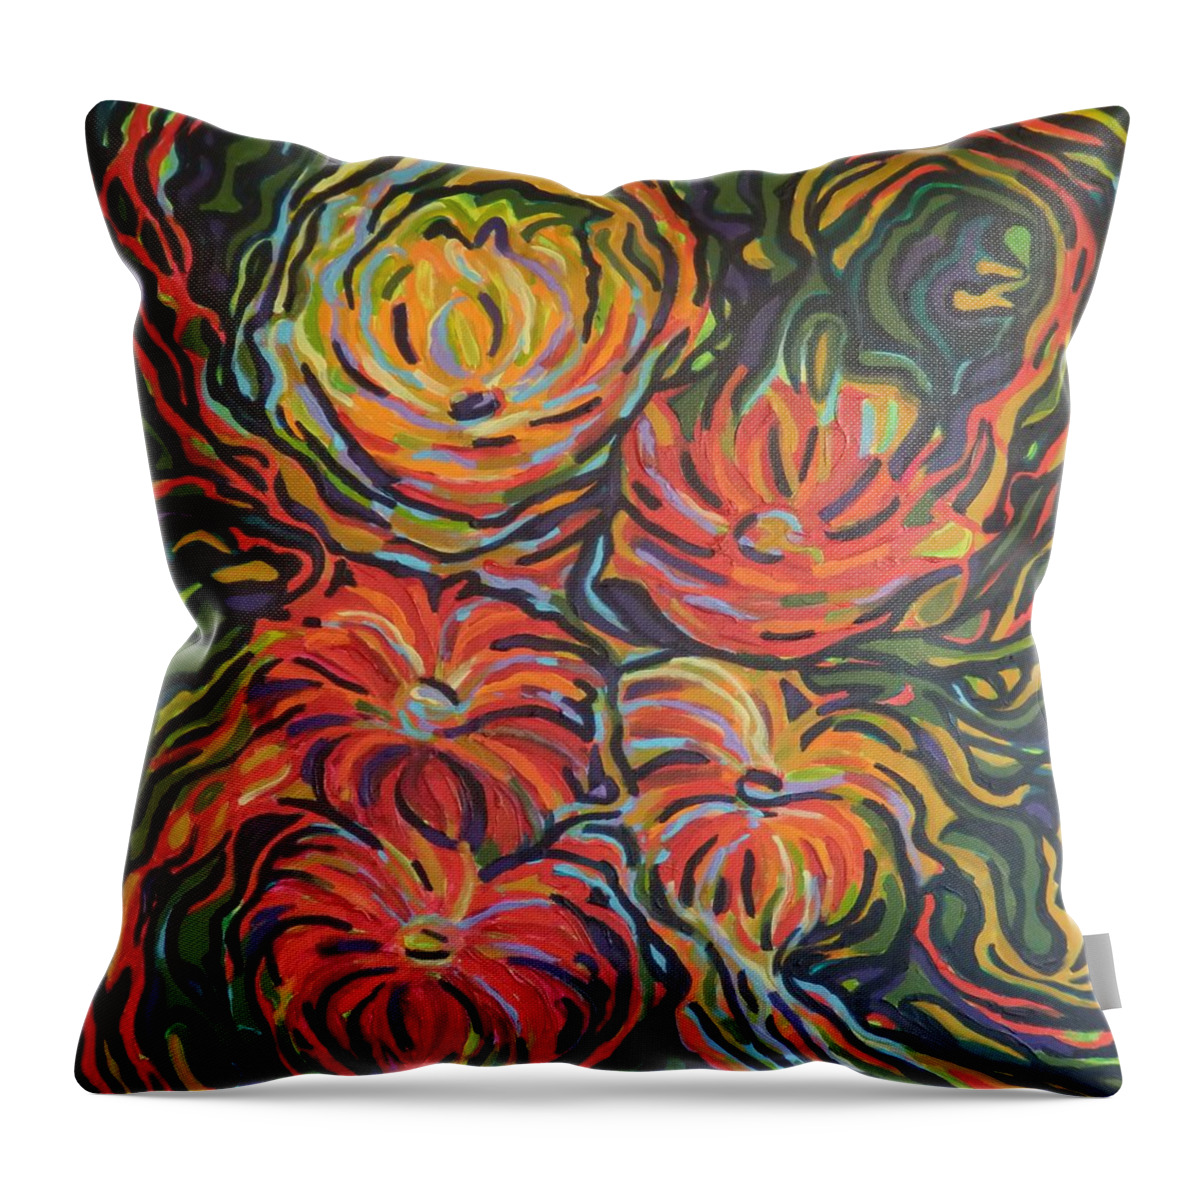 Zinnias Throw Pillow featuring the painting In full bloom by Zofia Kijak